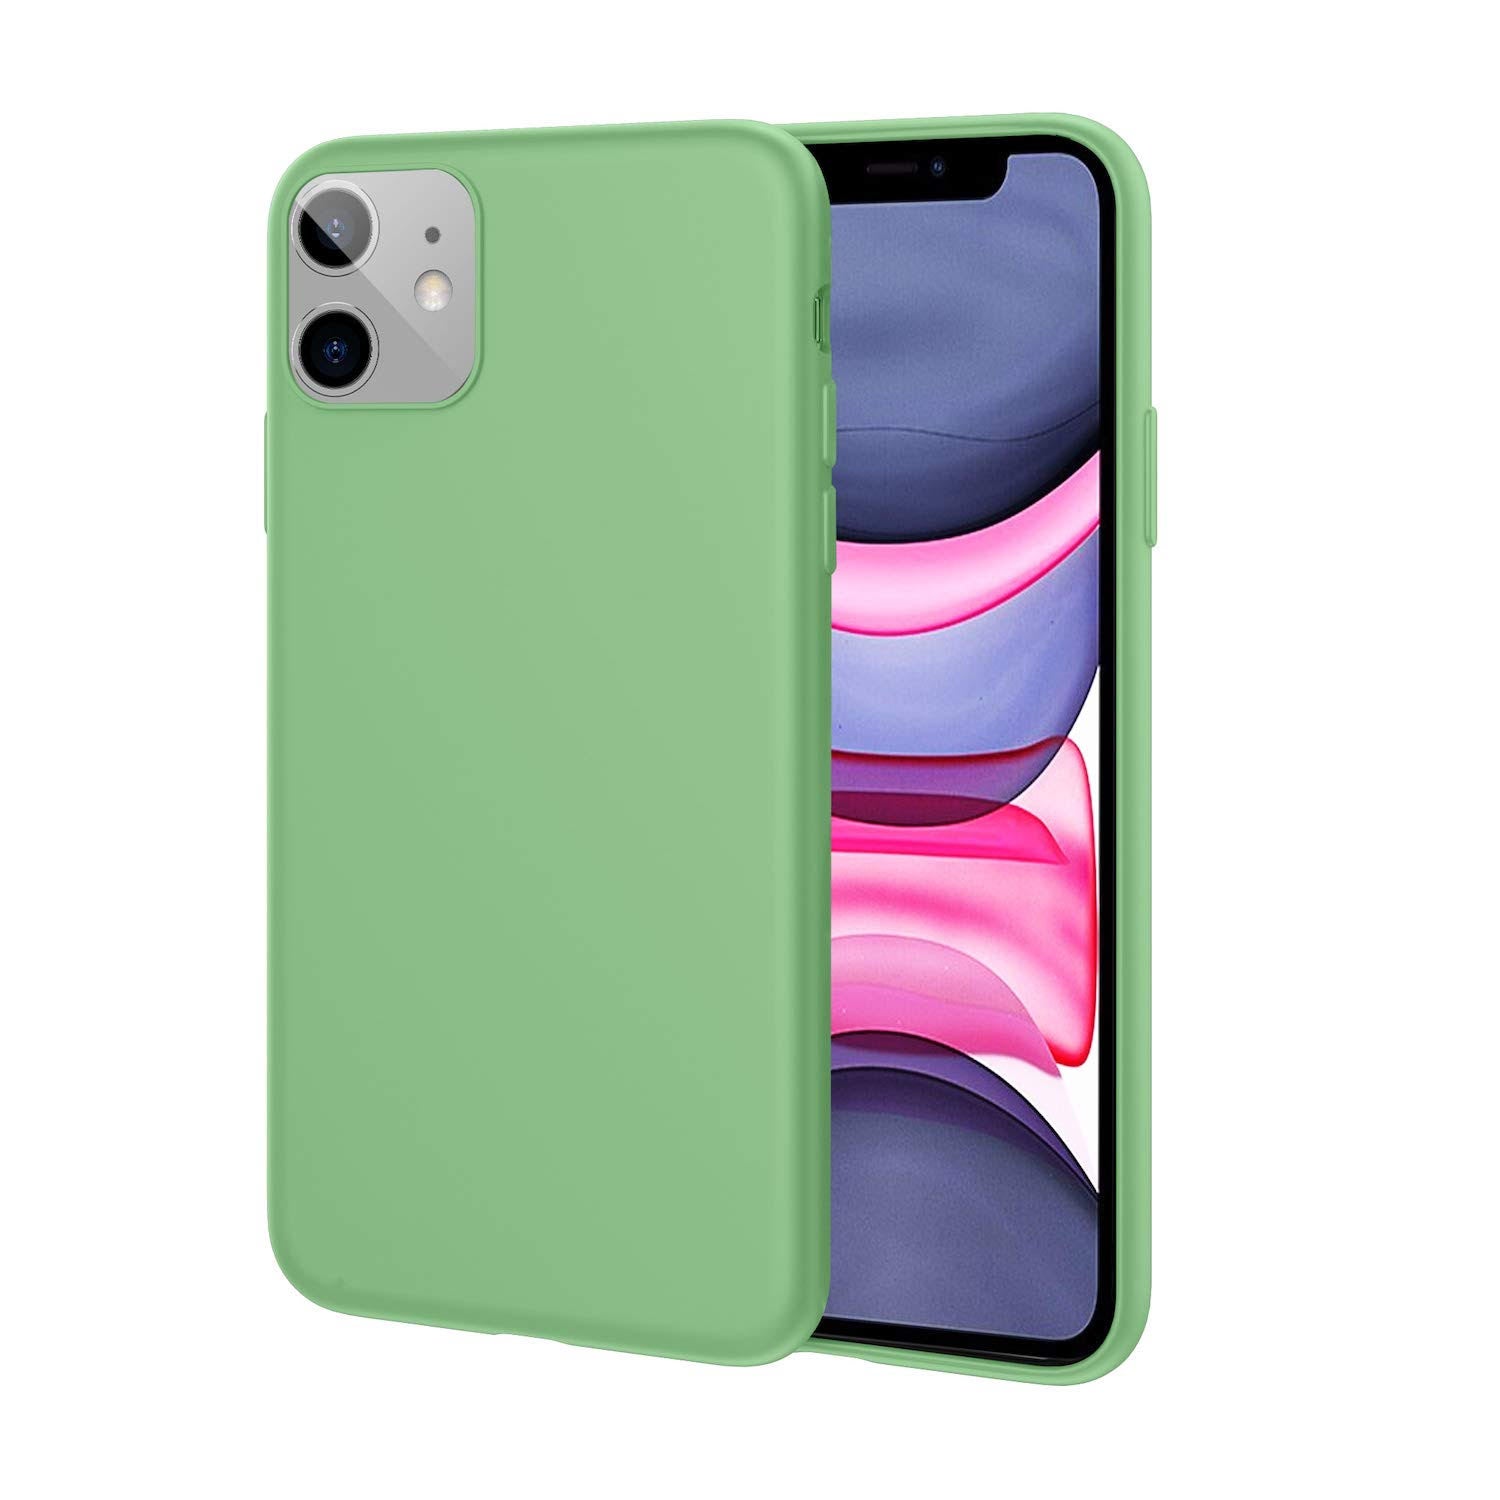 TGVIS Silicone Shockproof Protective Case For iPhone 11 6.1-inch - Green